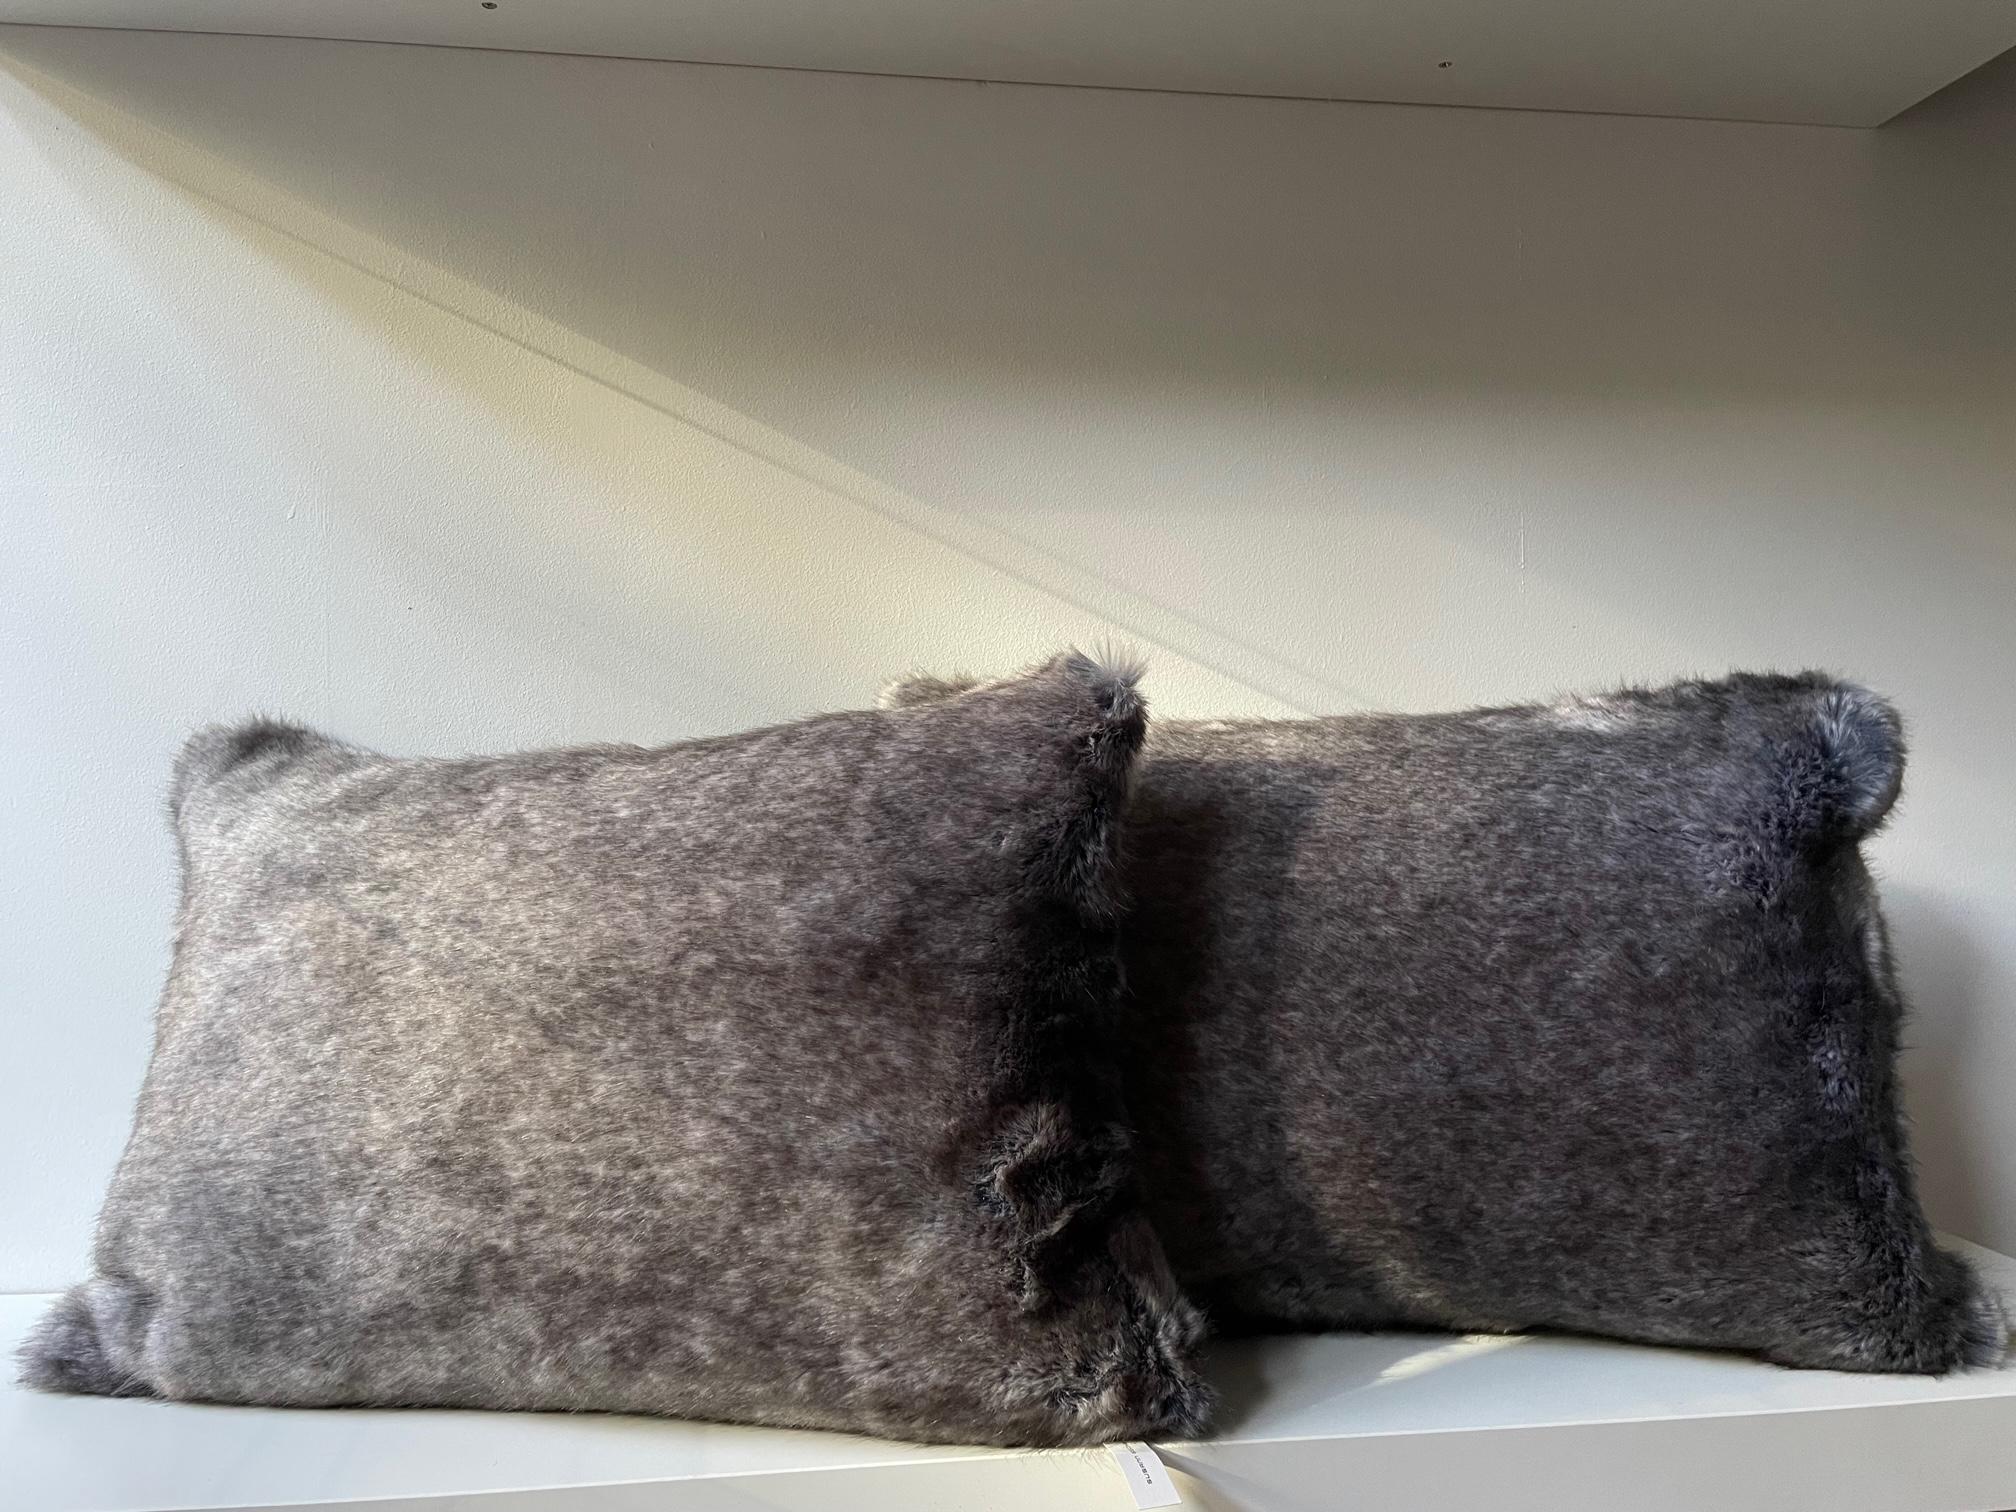 1 Pair faux fur cushions col. grey melange with grey fabric ( mix silk and cotton) at the back, very high end faux fur in combination with plain fabric, finish with self piping, cushion cover with concealed zipper and cotton lining, inner pad with